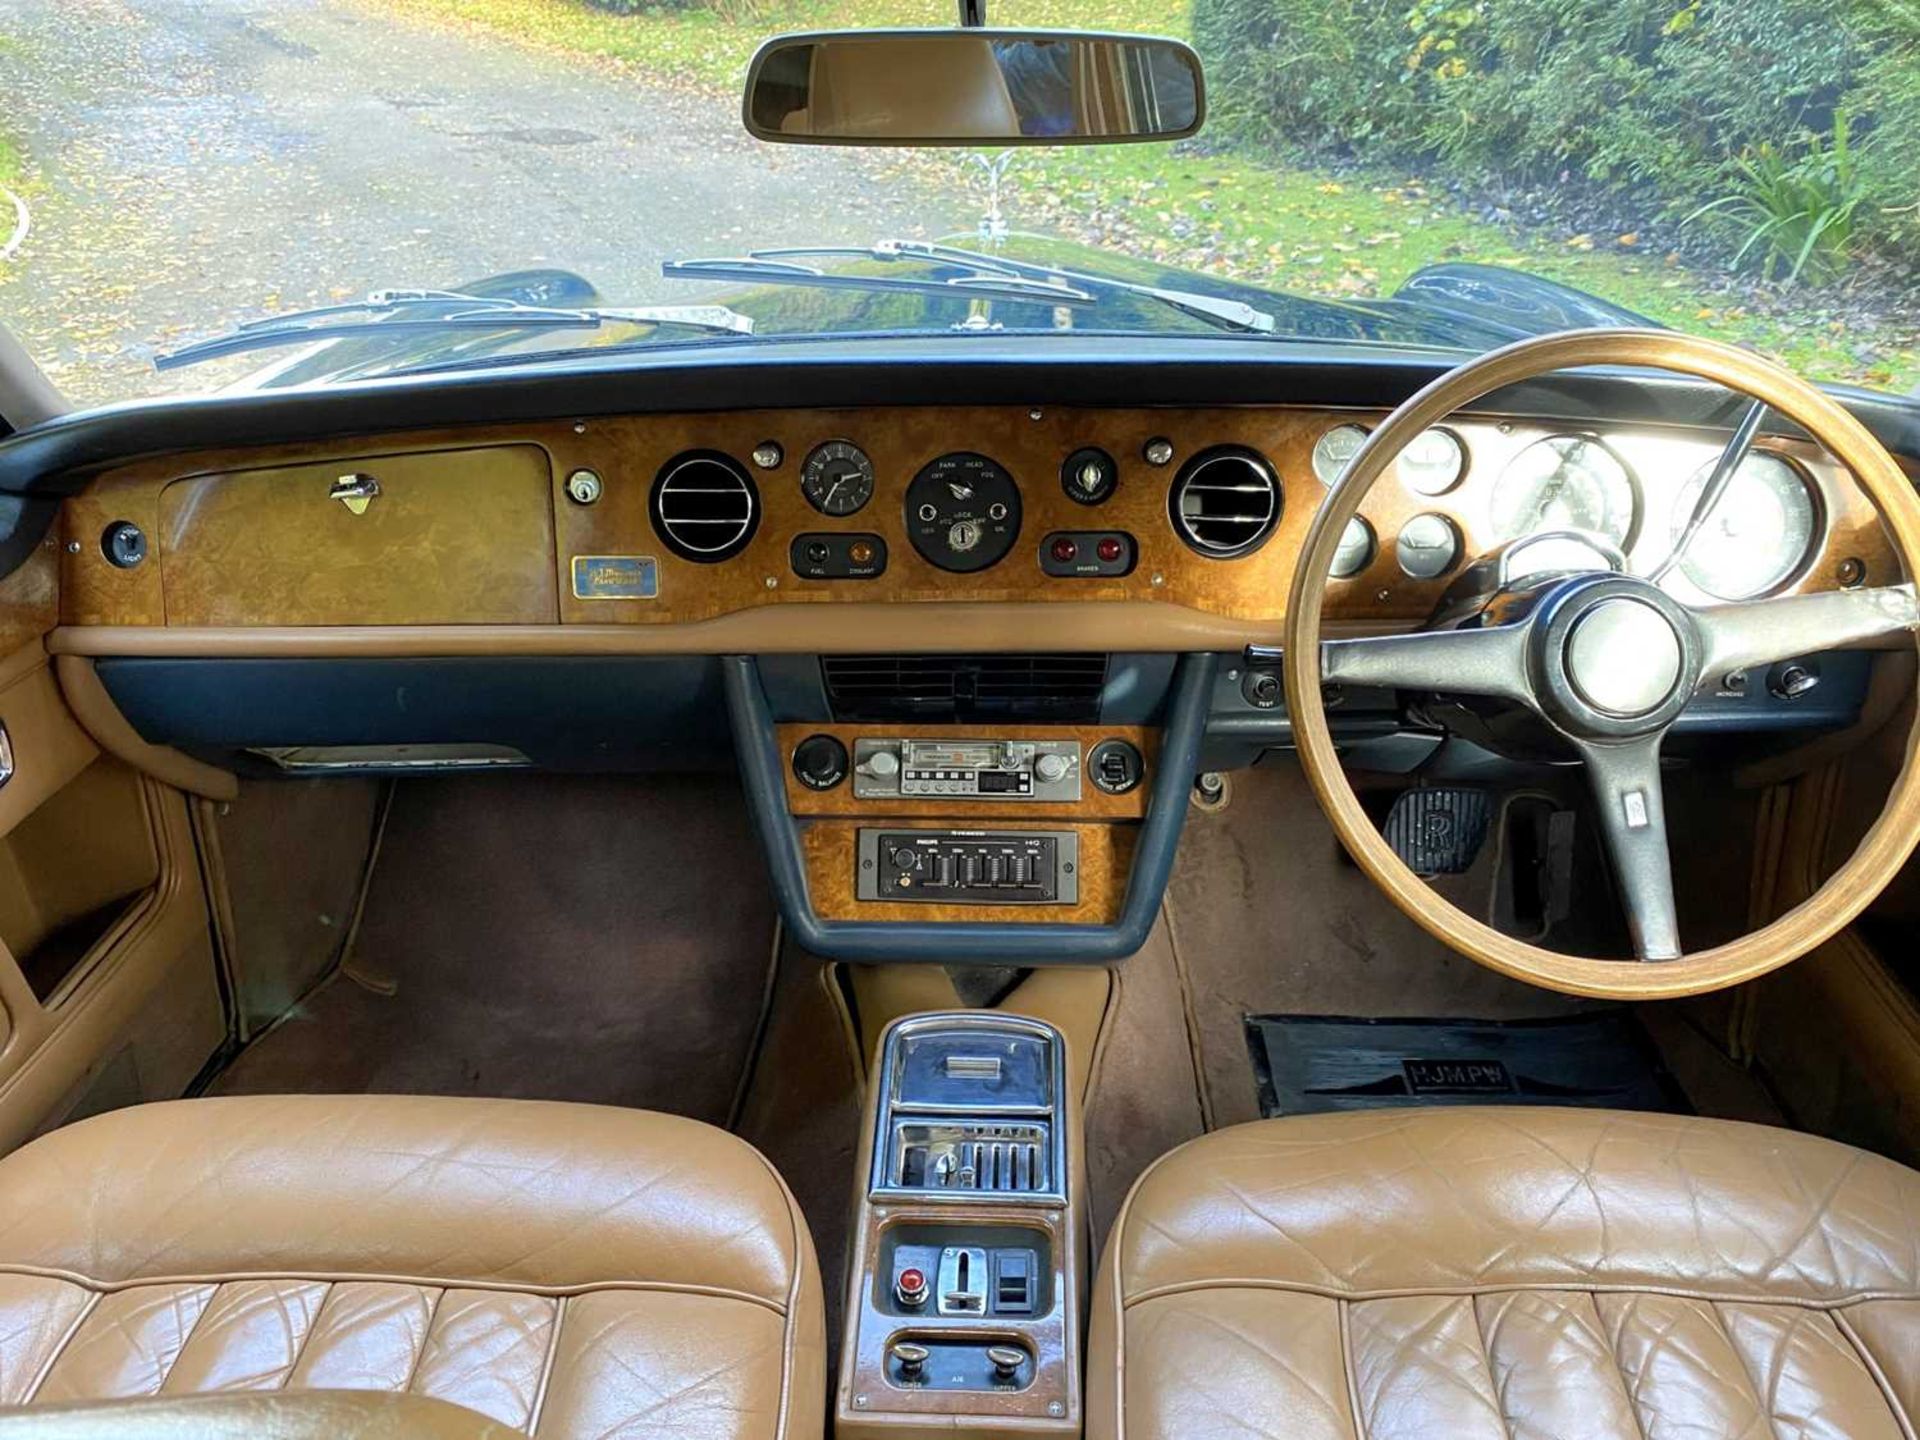 1971 Rolls-Royce Corniche Saloon Finished in Royal Navy Blue with Tobacco hide - Image 38 of 100